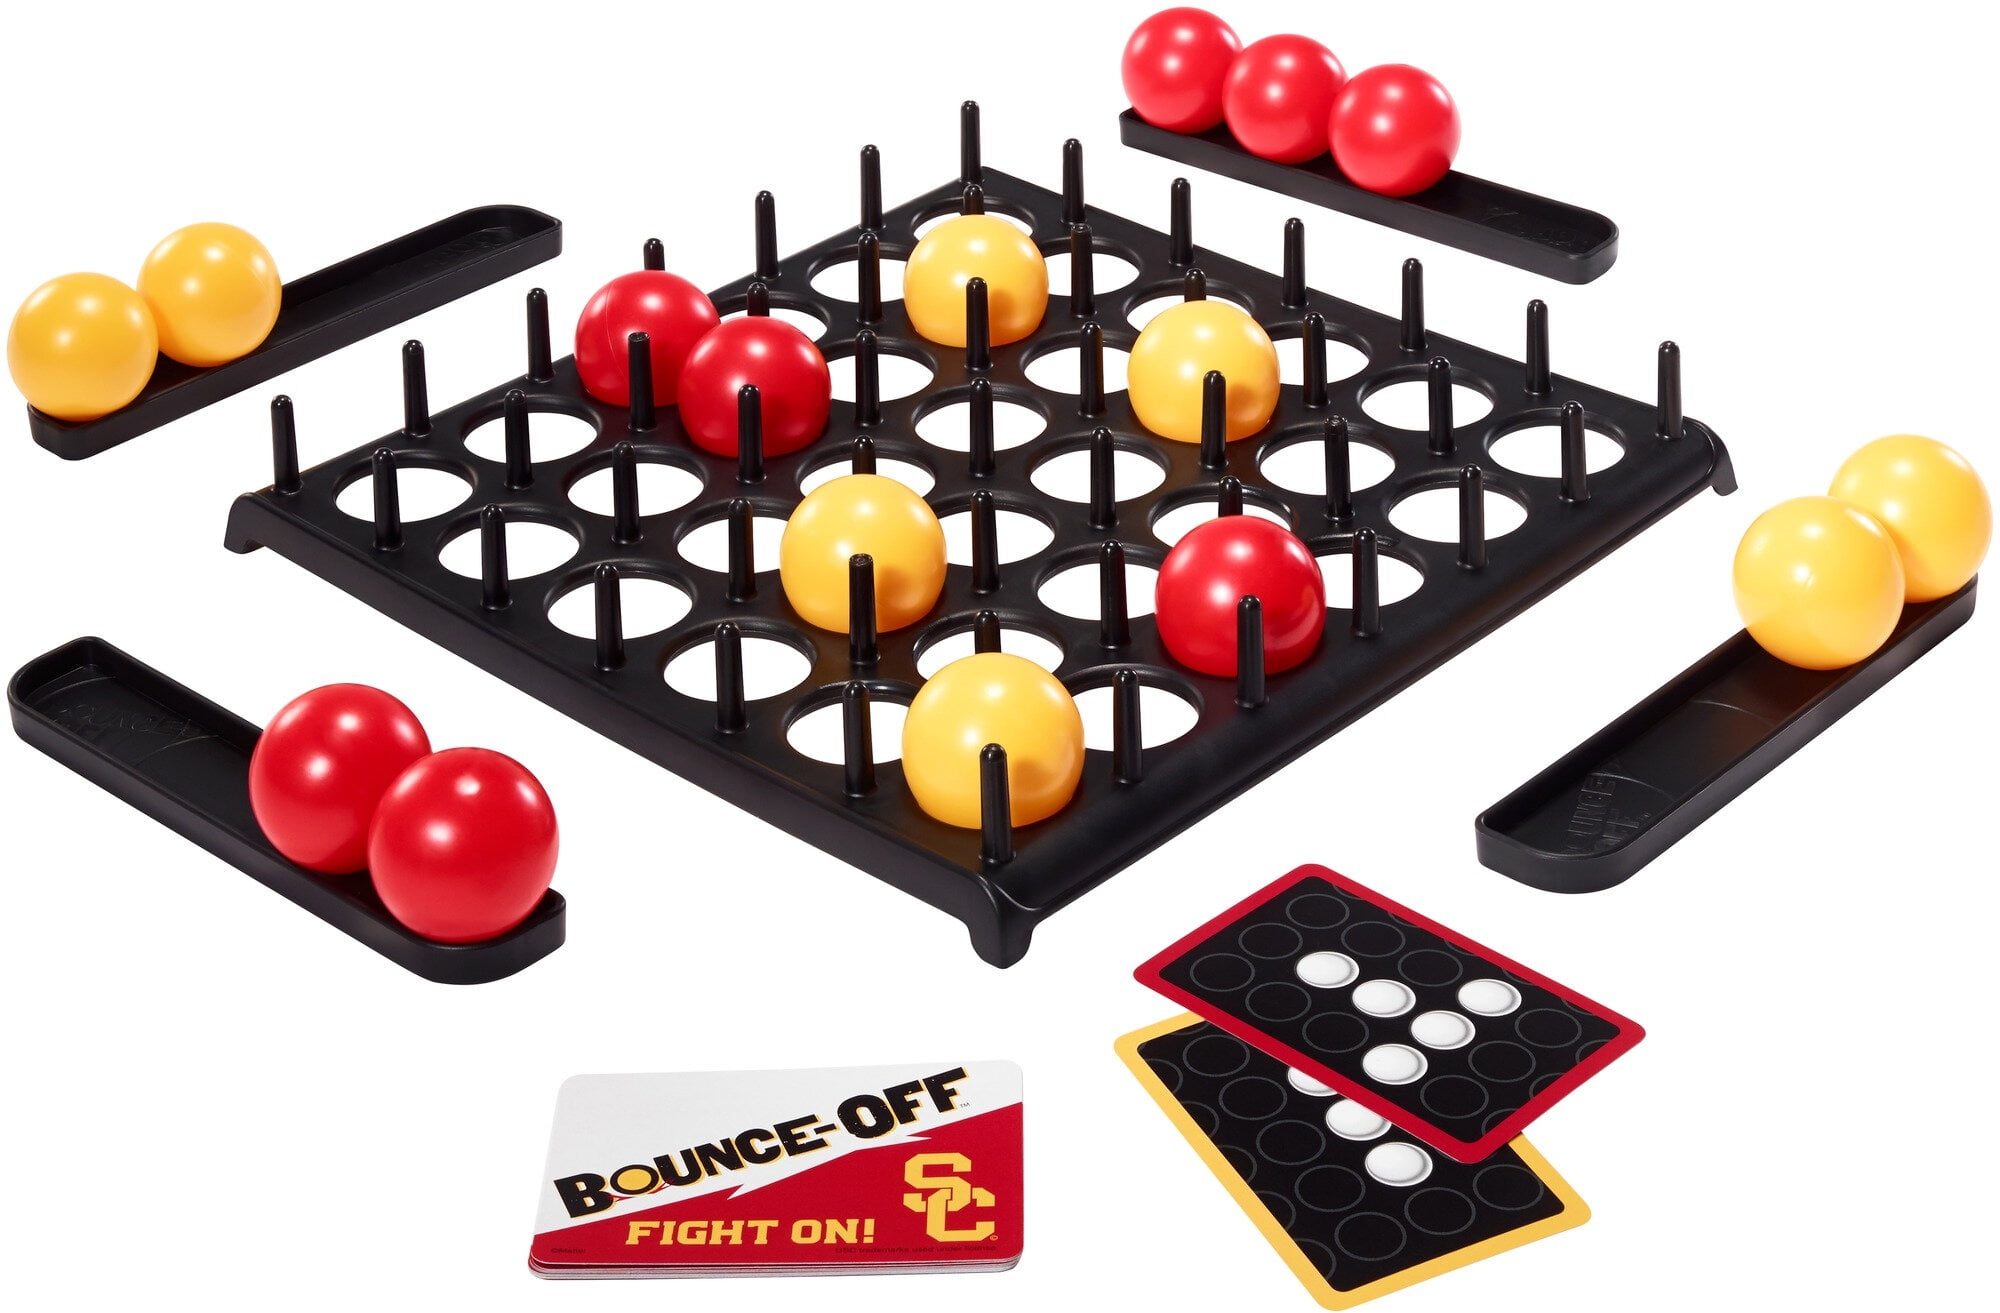 Bounce-Off Ping Pong Game Free Shipping Mattel Games Bounce-off USC Game 